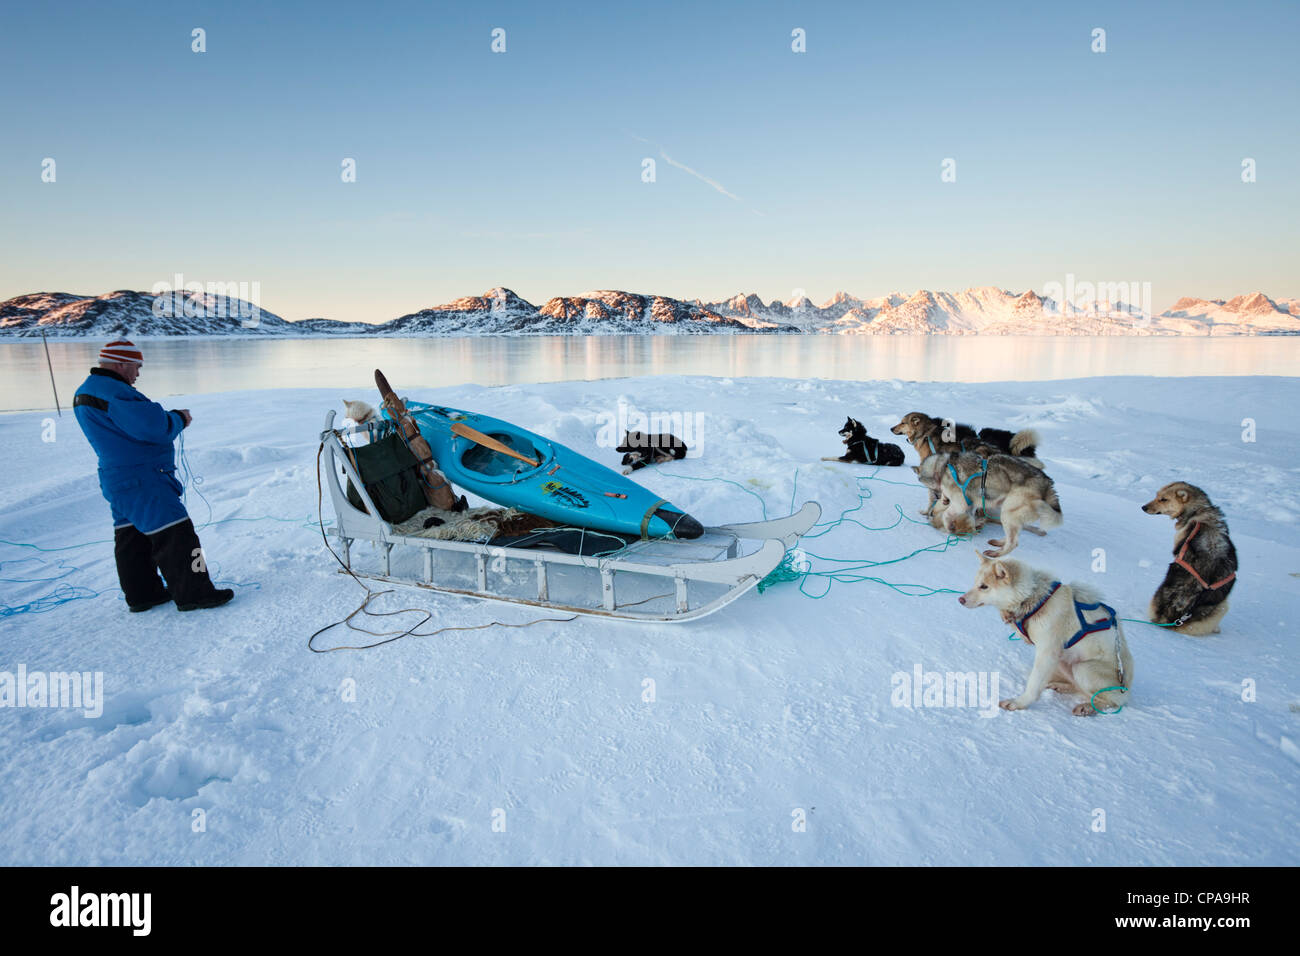 Huskies and sled in Greenland landscape Stock Photo